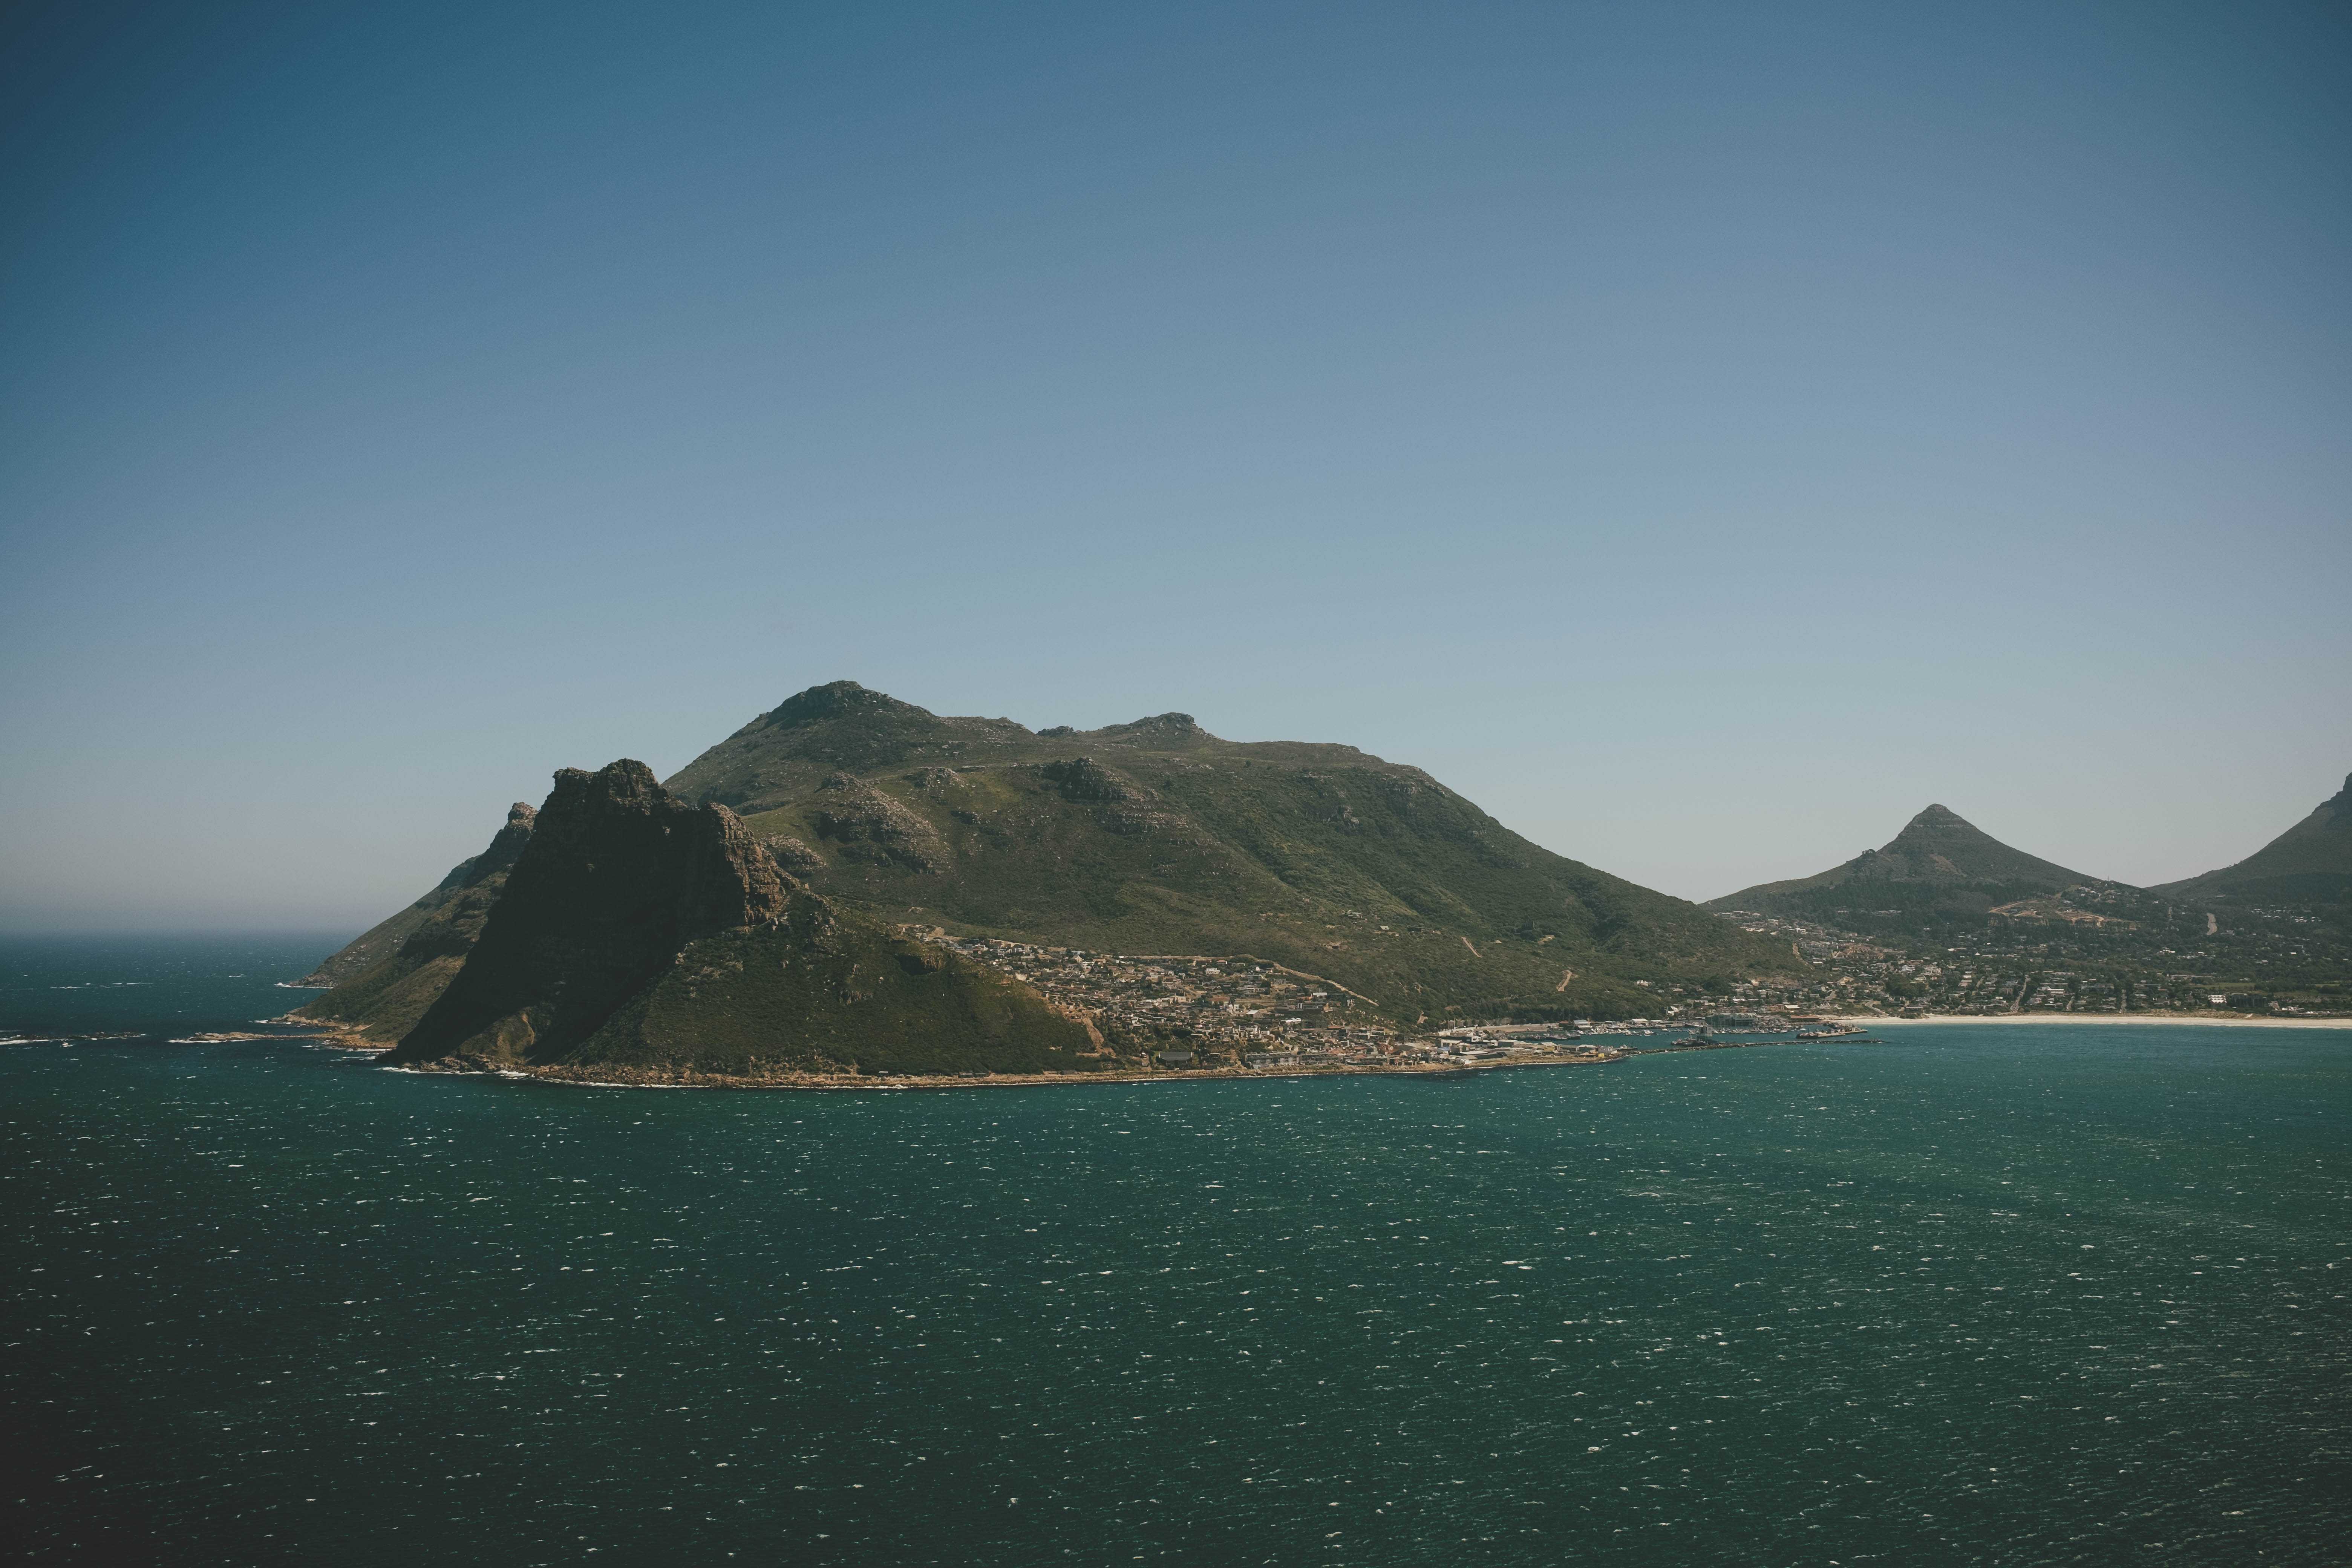 Looking across the choppy waters of Hout Bay, a mountain far off in the distance with houses built up partially along the base